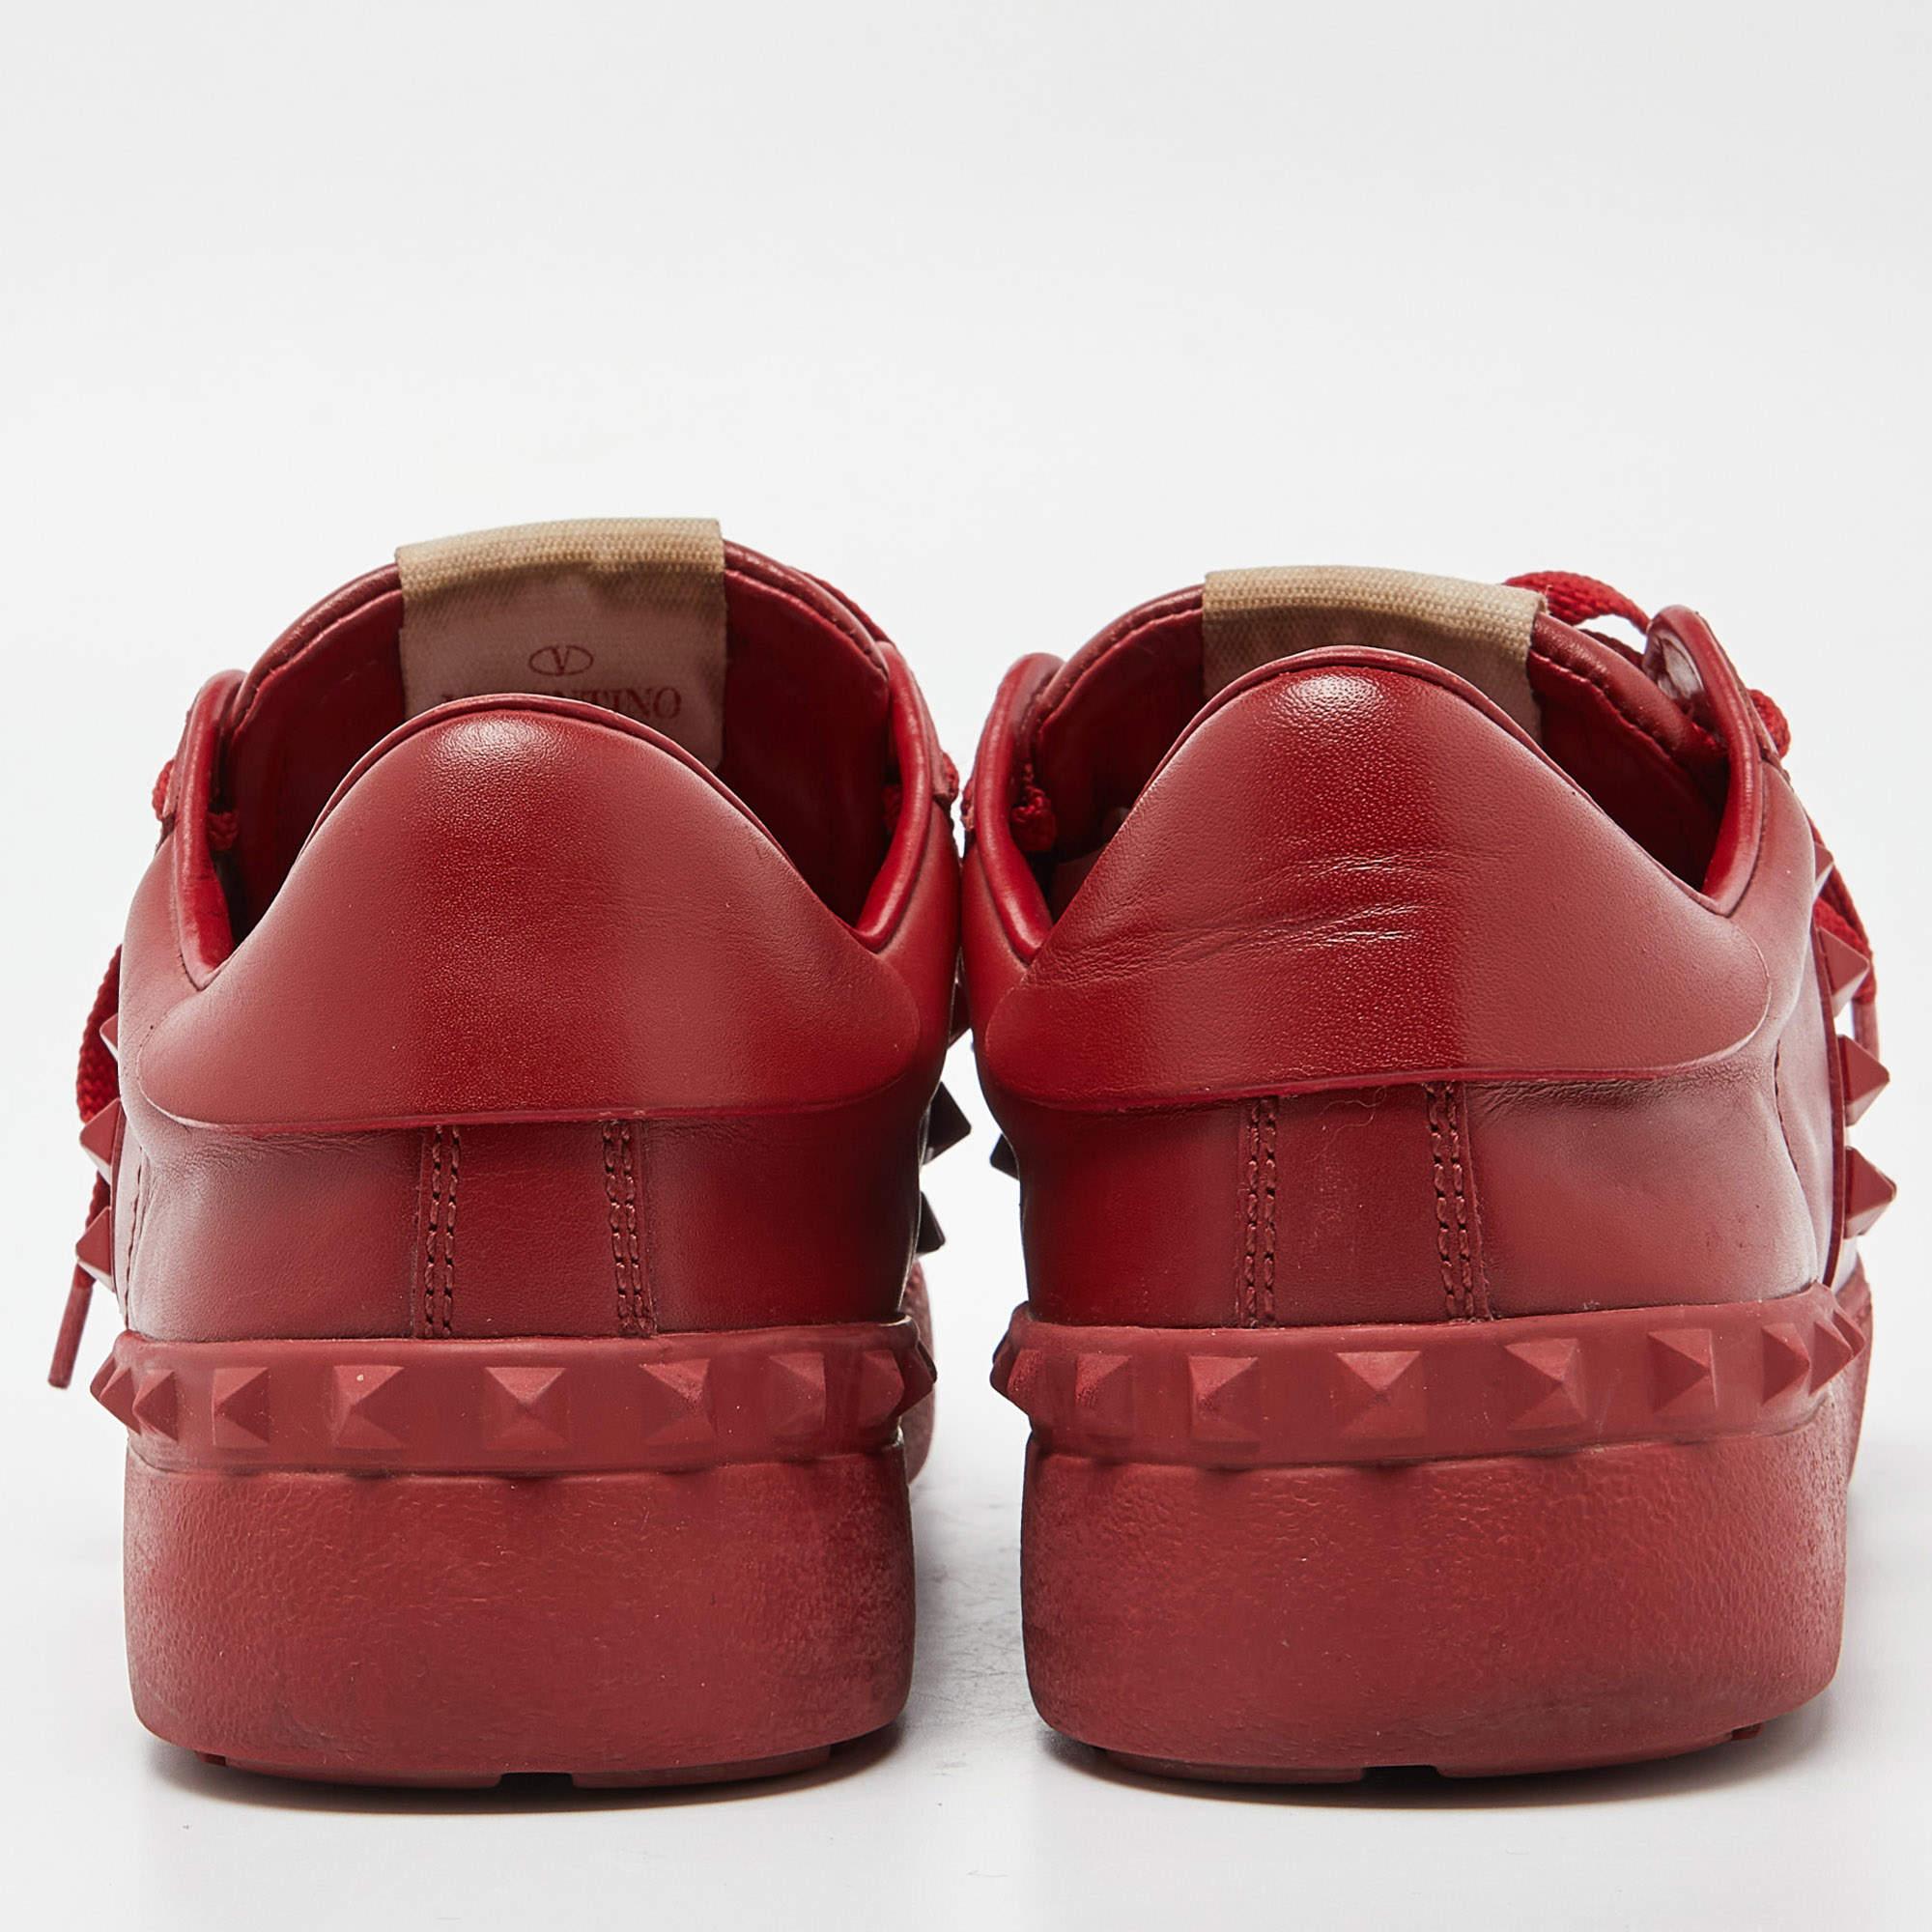 Valentino Red Leather Rockstud Untitled Sneakers Size 37 4